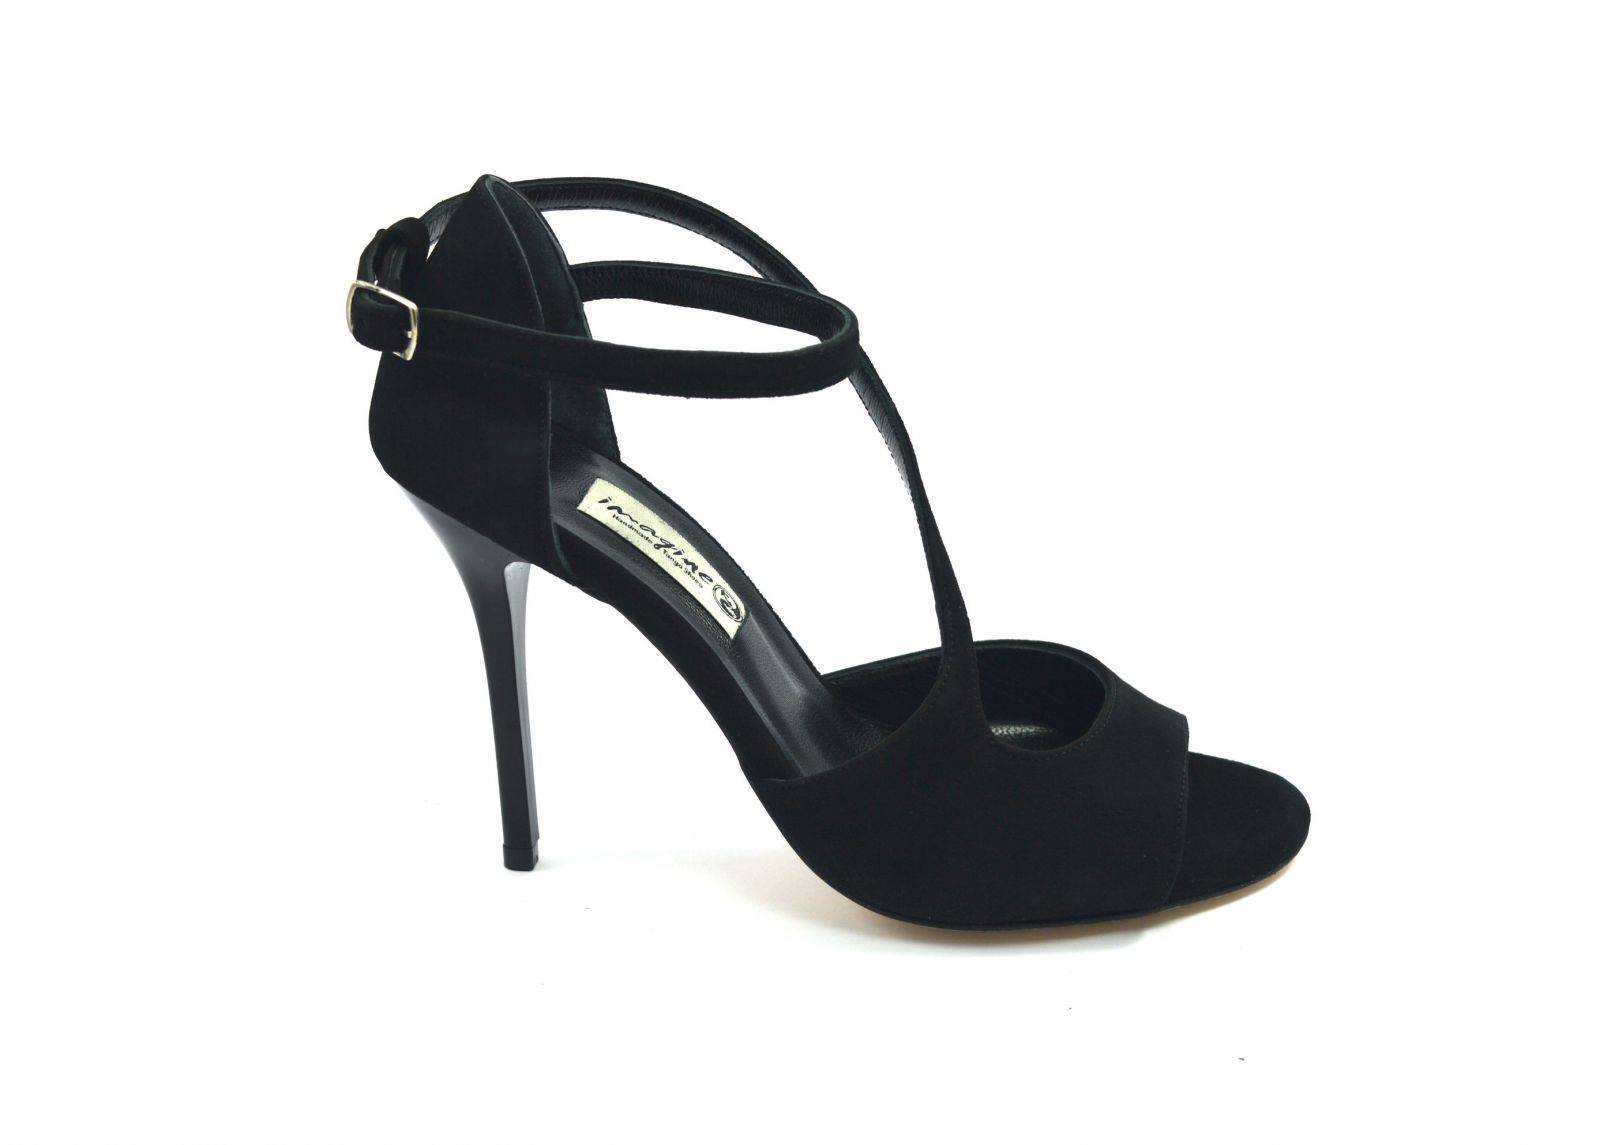 Women's argentine tango dance shoes, open toe in black suede leather